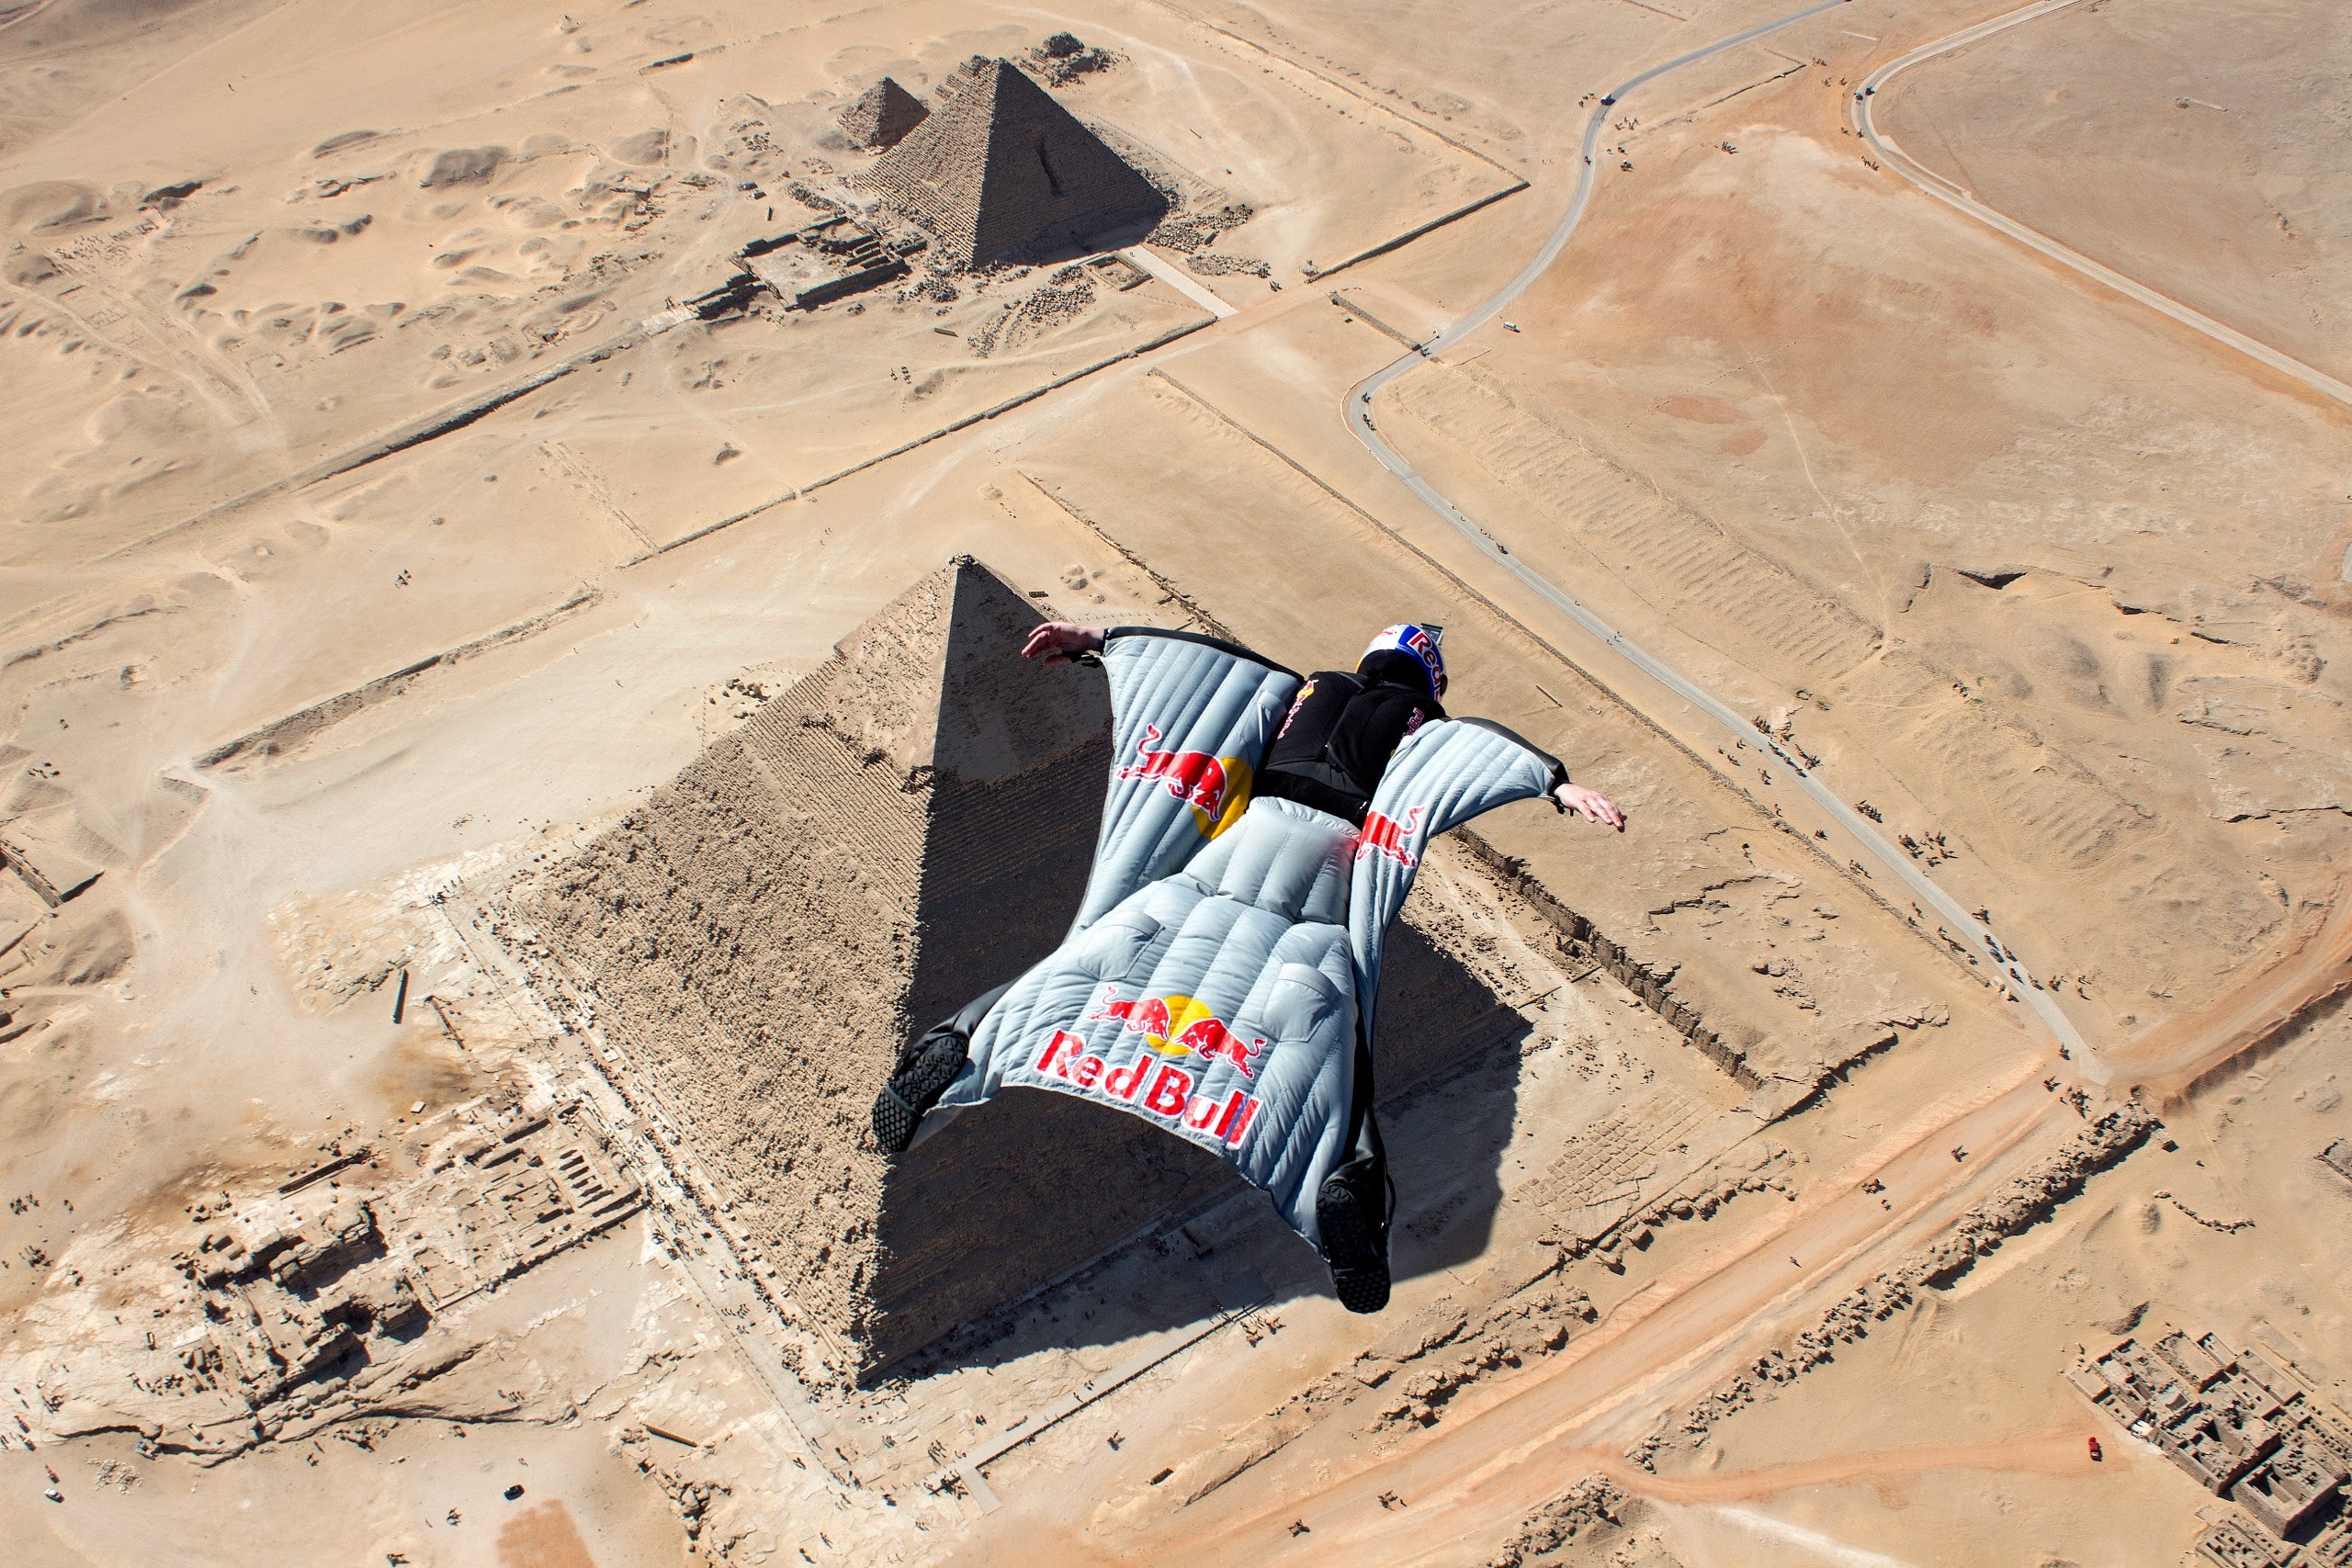 People 2560x1707 men sport parachutes jumping nature sand flying helmet wingsuit desert Pyramids of Giza Egypt Red Bull skydiving skydiver aerial view pyramid ancient history landmark World Heritage Site Africa